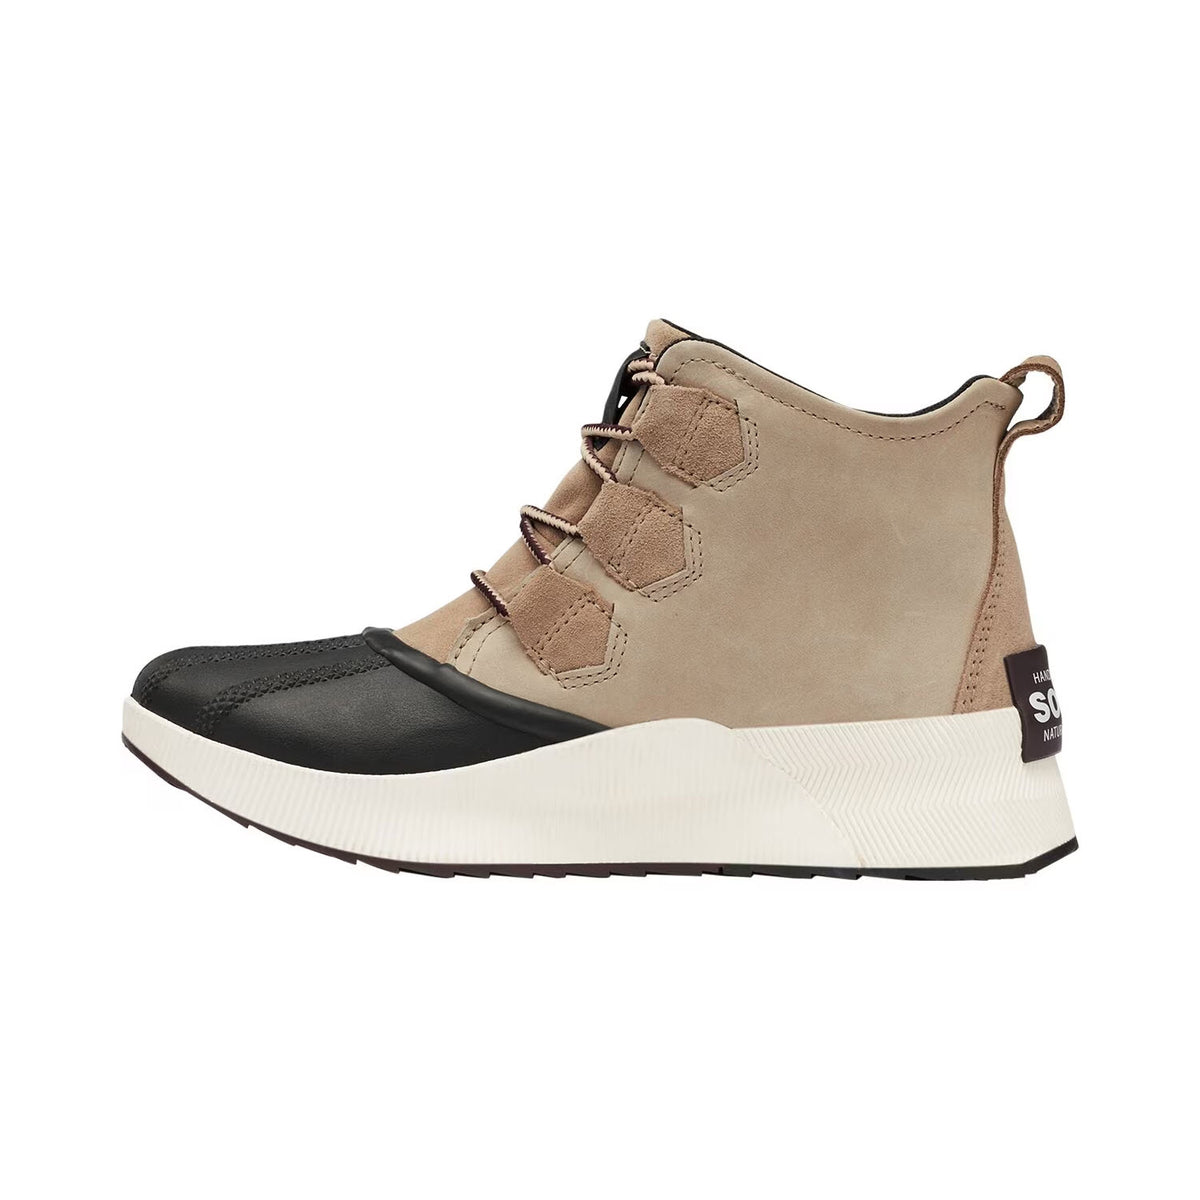 Beige and black SOREL OUT N ABOUT III CLASSIC OMEGA TAUPE - WOMENS waterproof ankle boot with hook-and-loop strap closures and a chunky white sole, isolated on a white background.